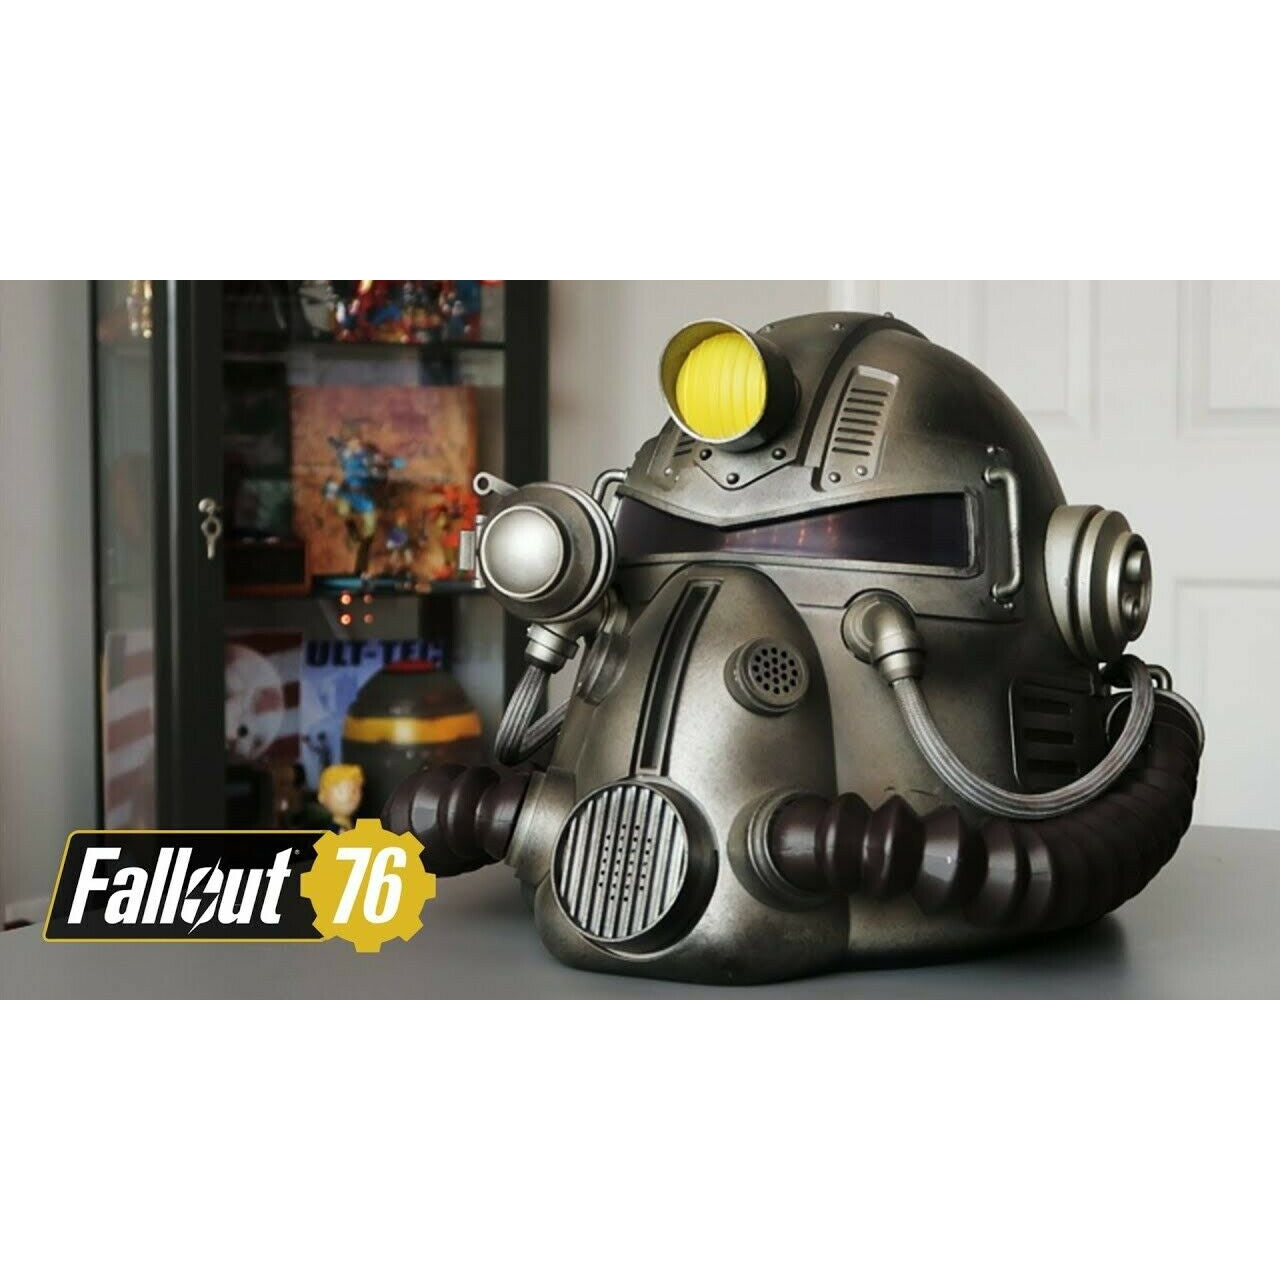 Fallout 76 Power Armour Edition PS4 Collector's Edition Playstation 4